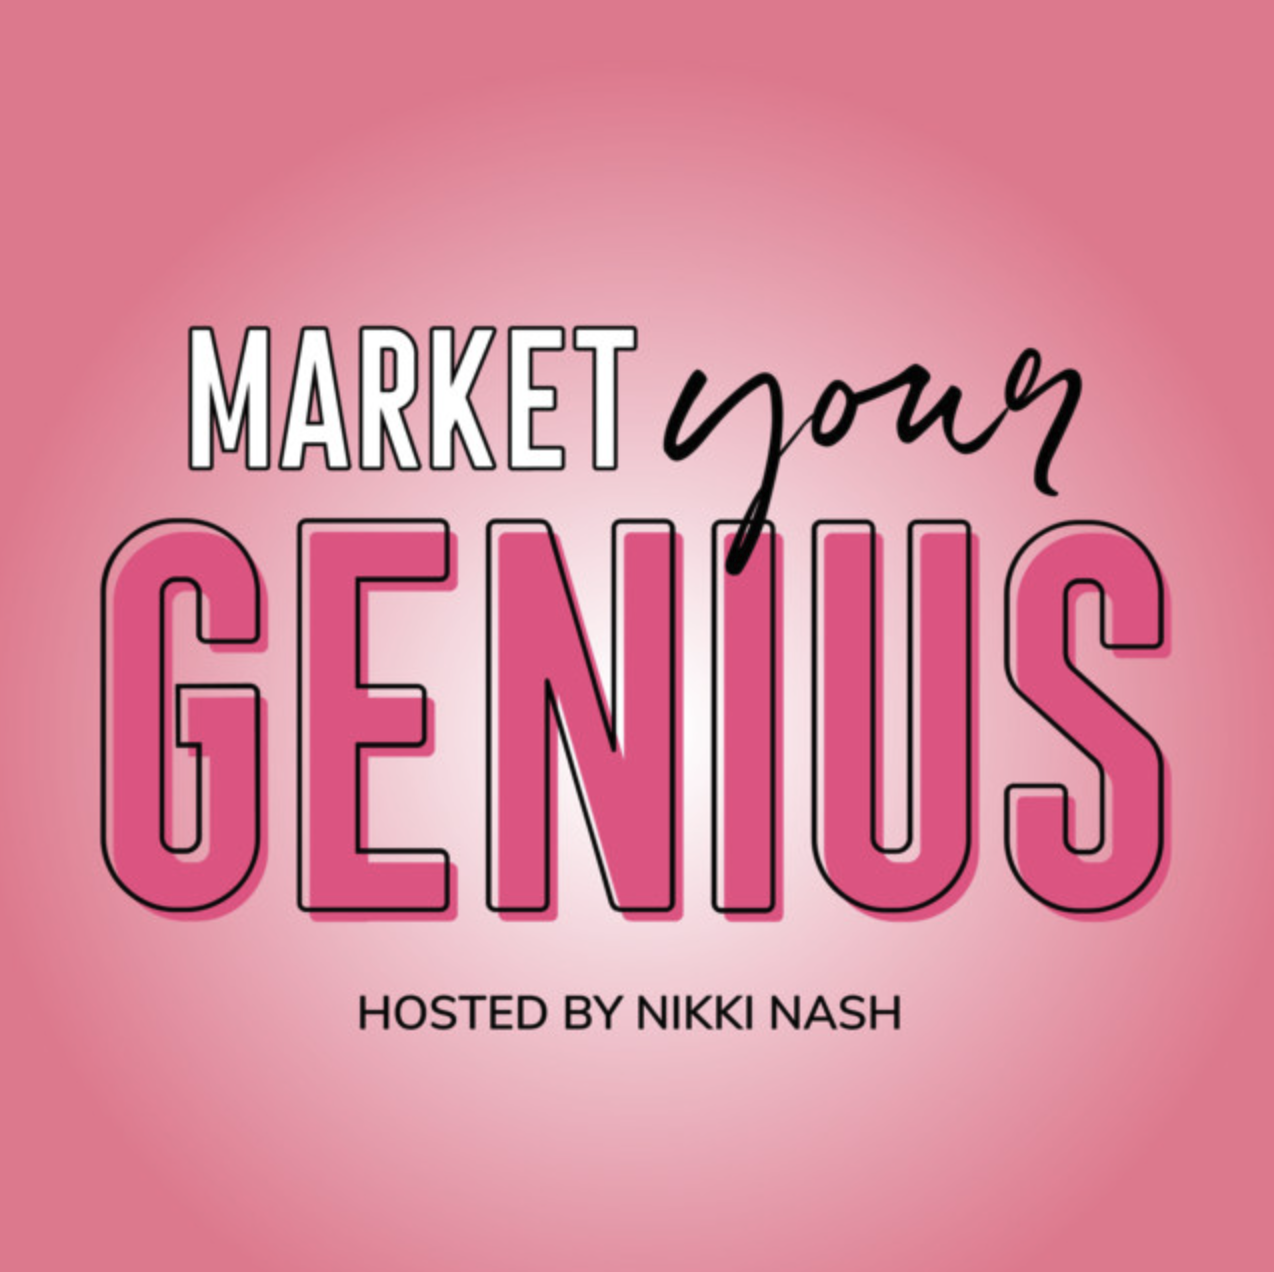 Market Your Genius, our pick for the best marketing podcast for diverse topics.